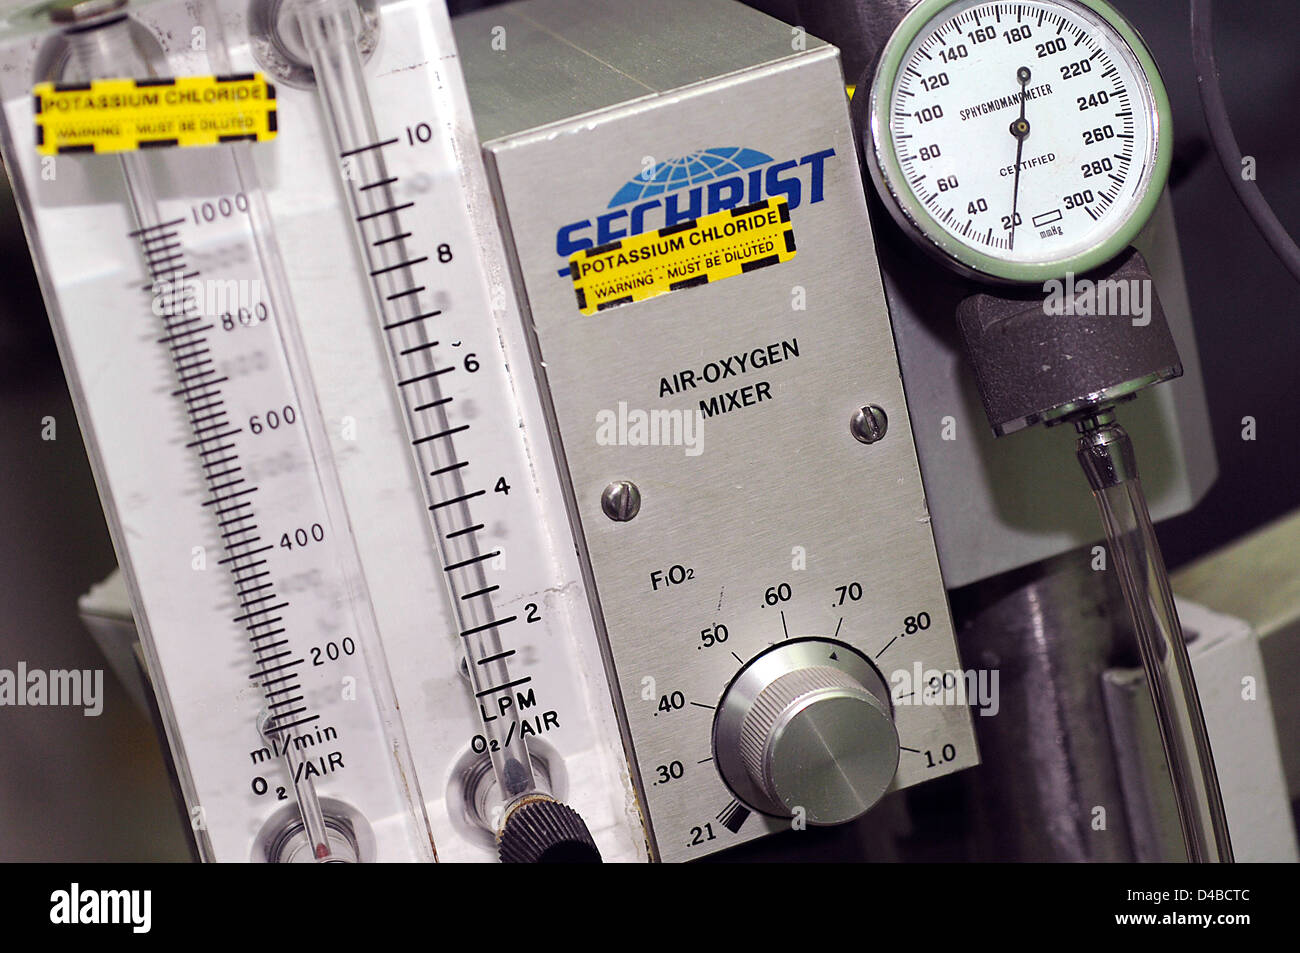 Close-up view air-oxygen mixer pressure gauge in on Cardiopulmonary bypass (CPB) also known as Heart-Lung Machine. Sudan Africa. Stock Photo